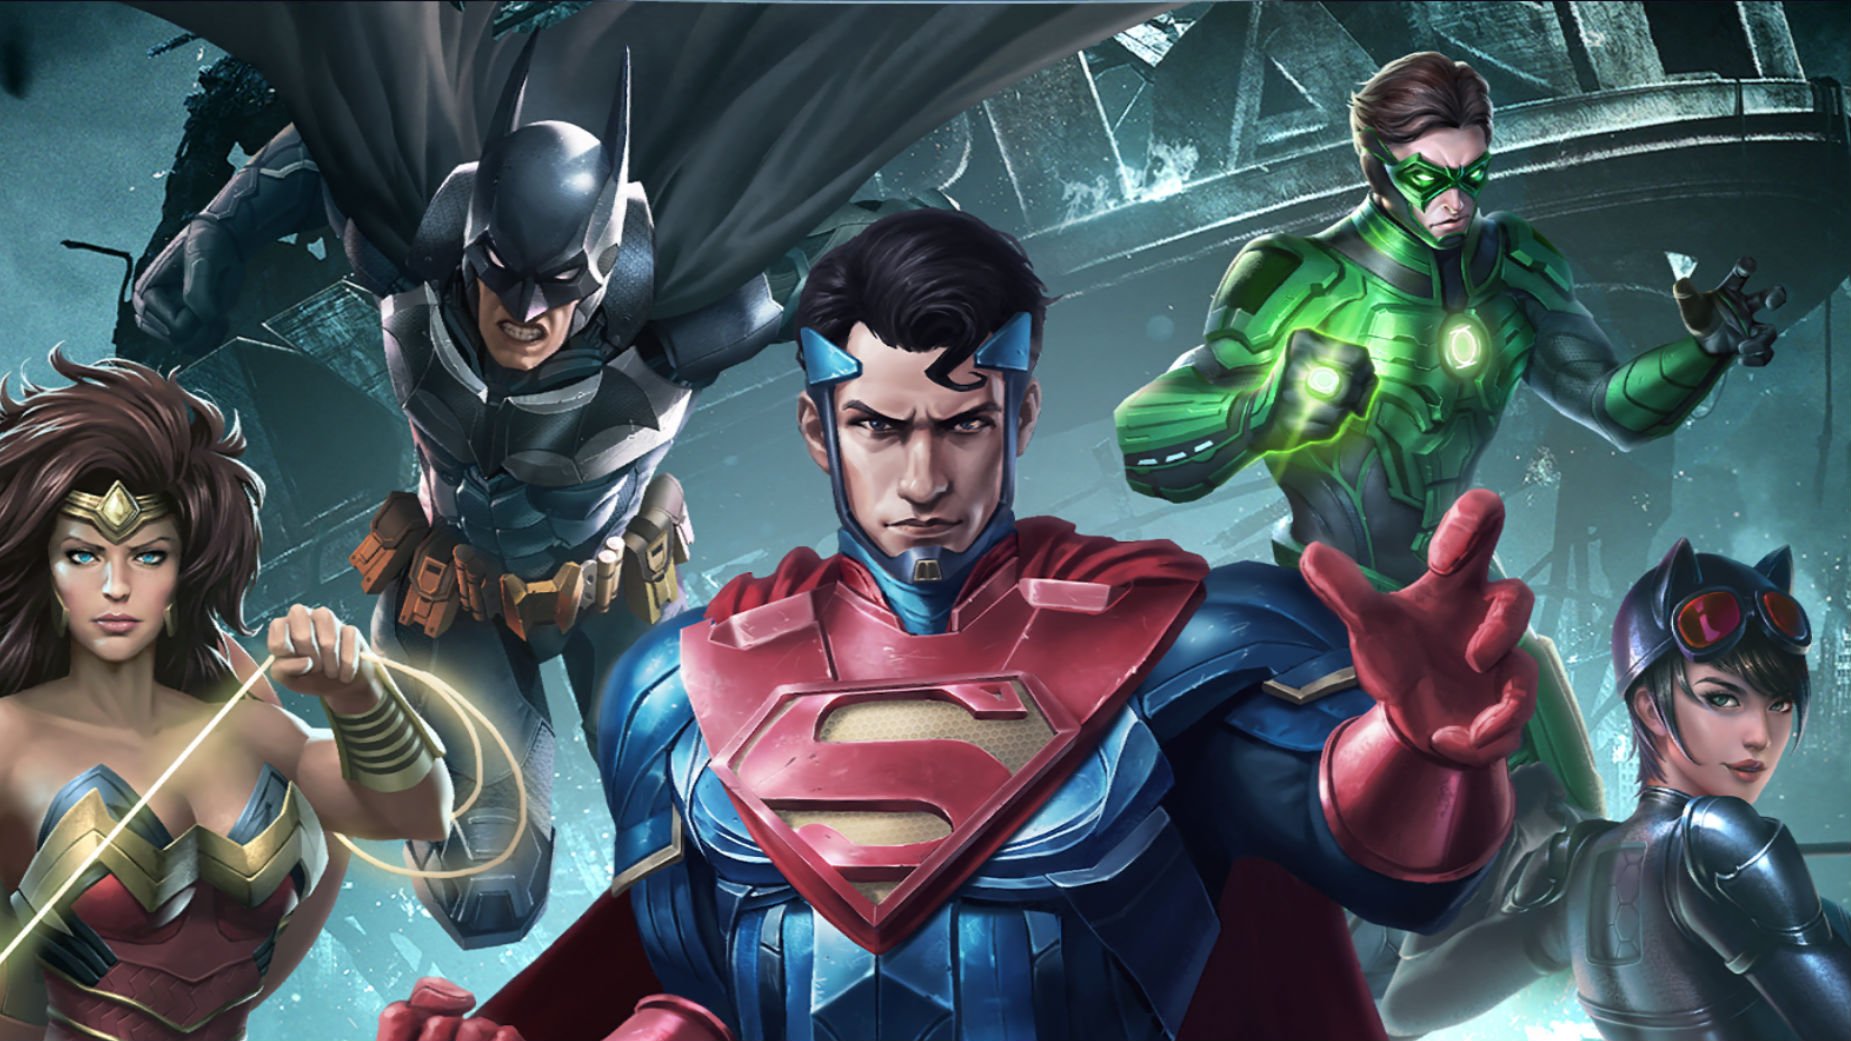 Injustice 2 Mobile: Complete Character List